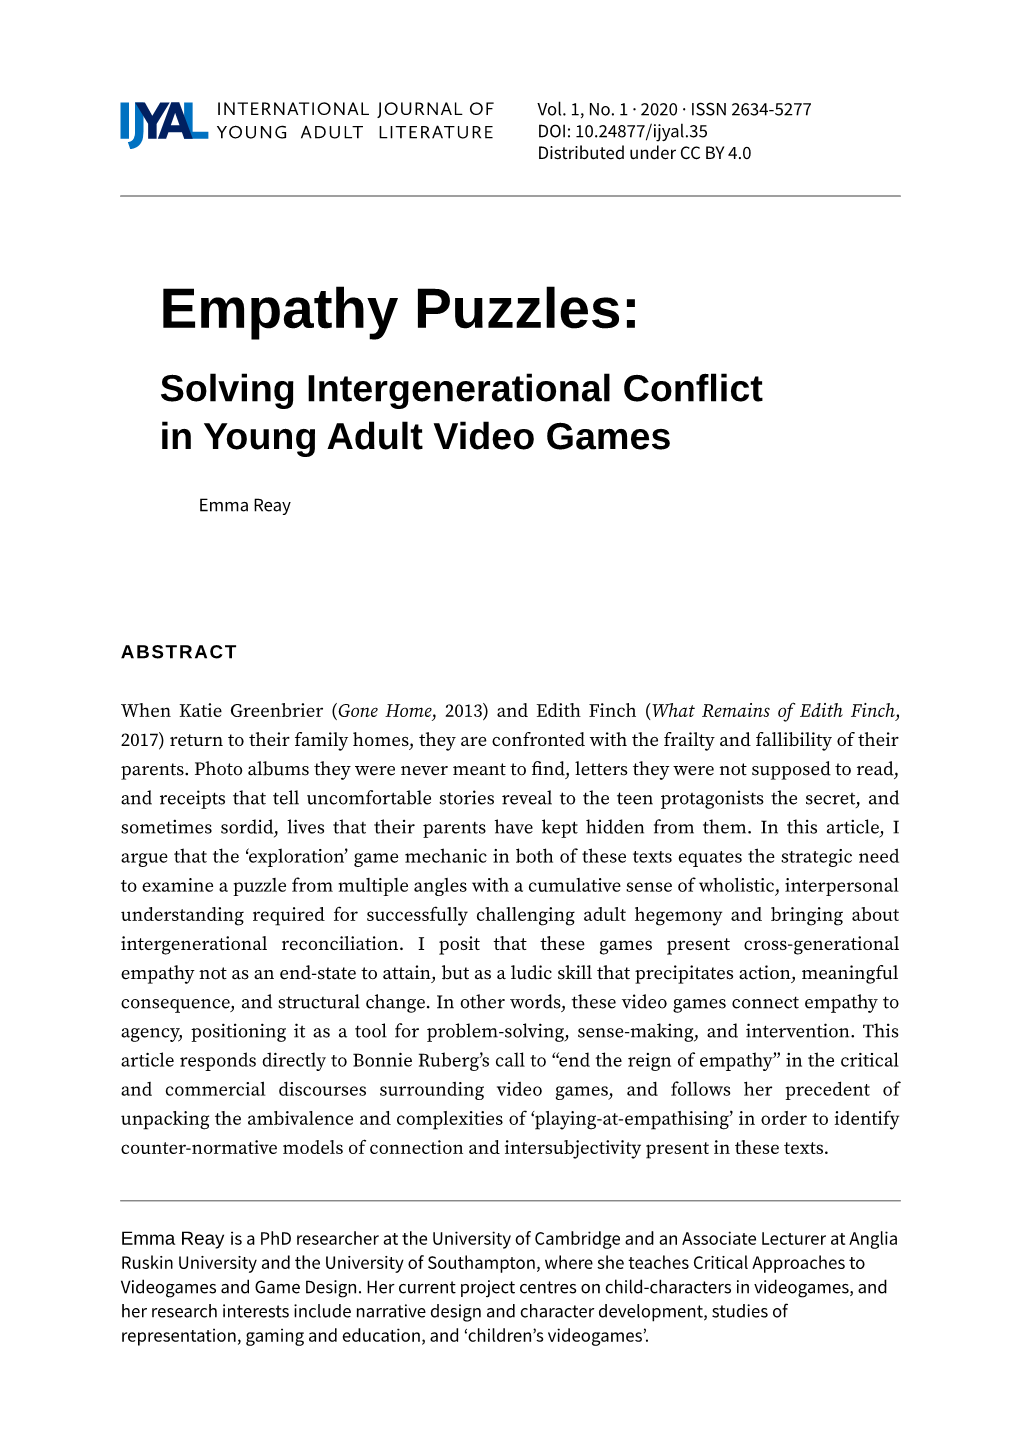 Empathy Puzzles: Solving Intergenerational Conflict in Young Adult Video Games